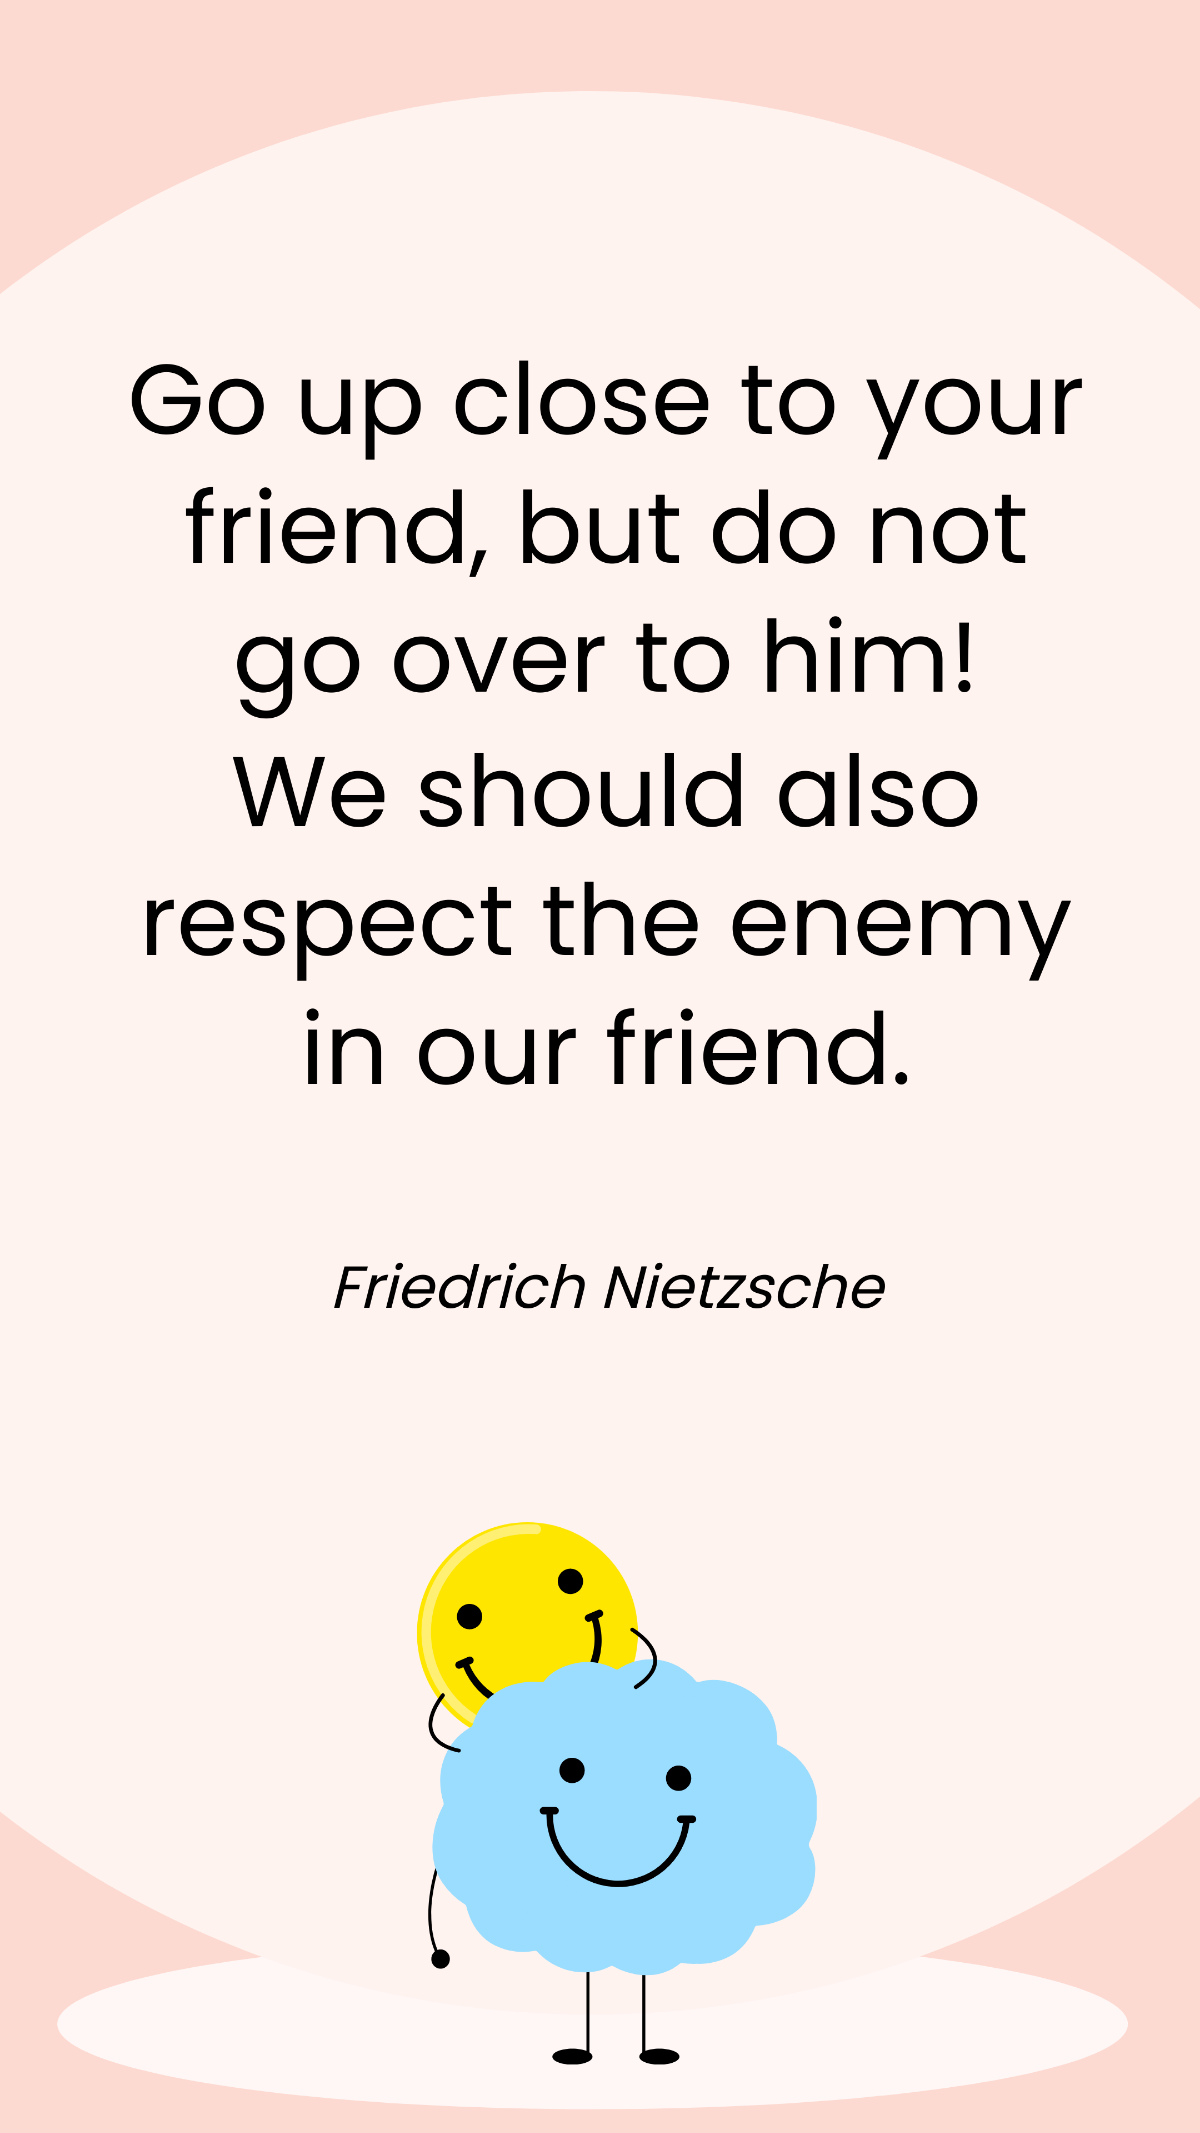 Friedrich Nietzsche - Go up close to your friend, but do not go over to him! We should also respect the enemy in our friend. Template